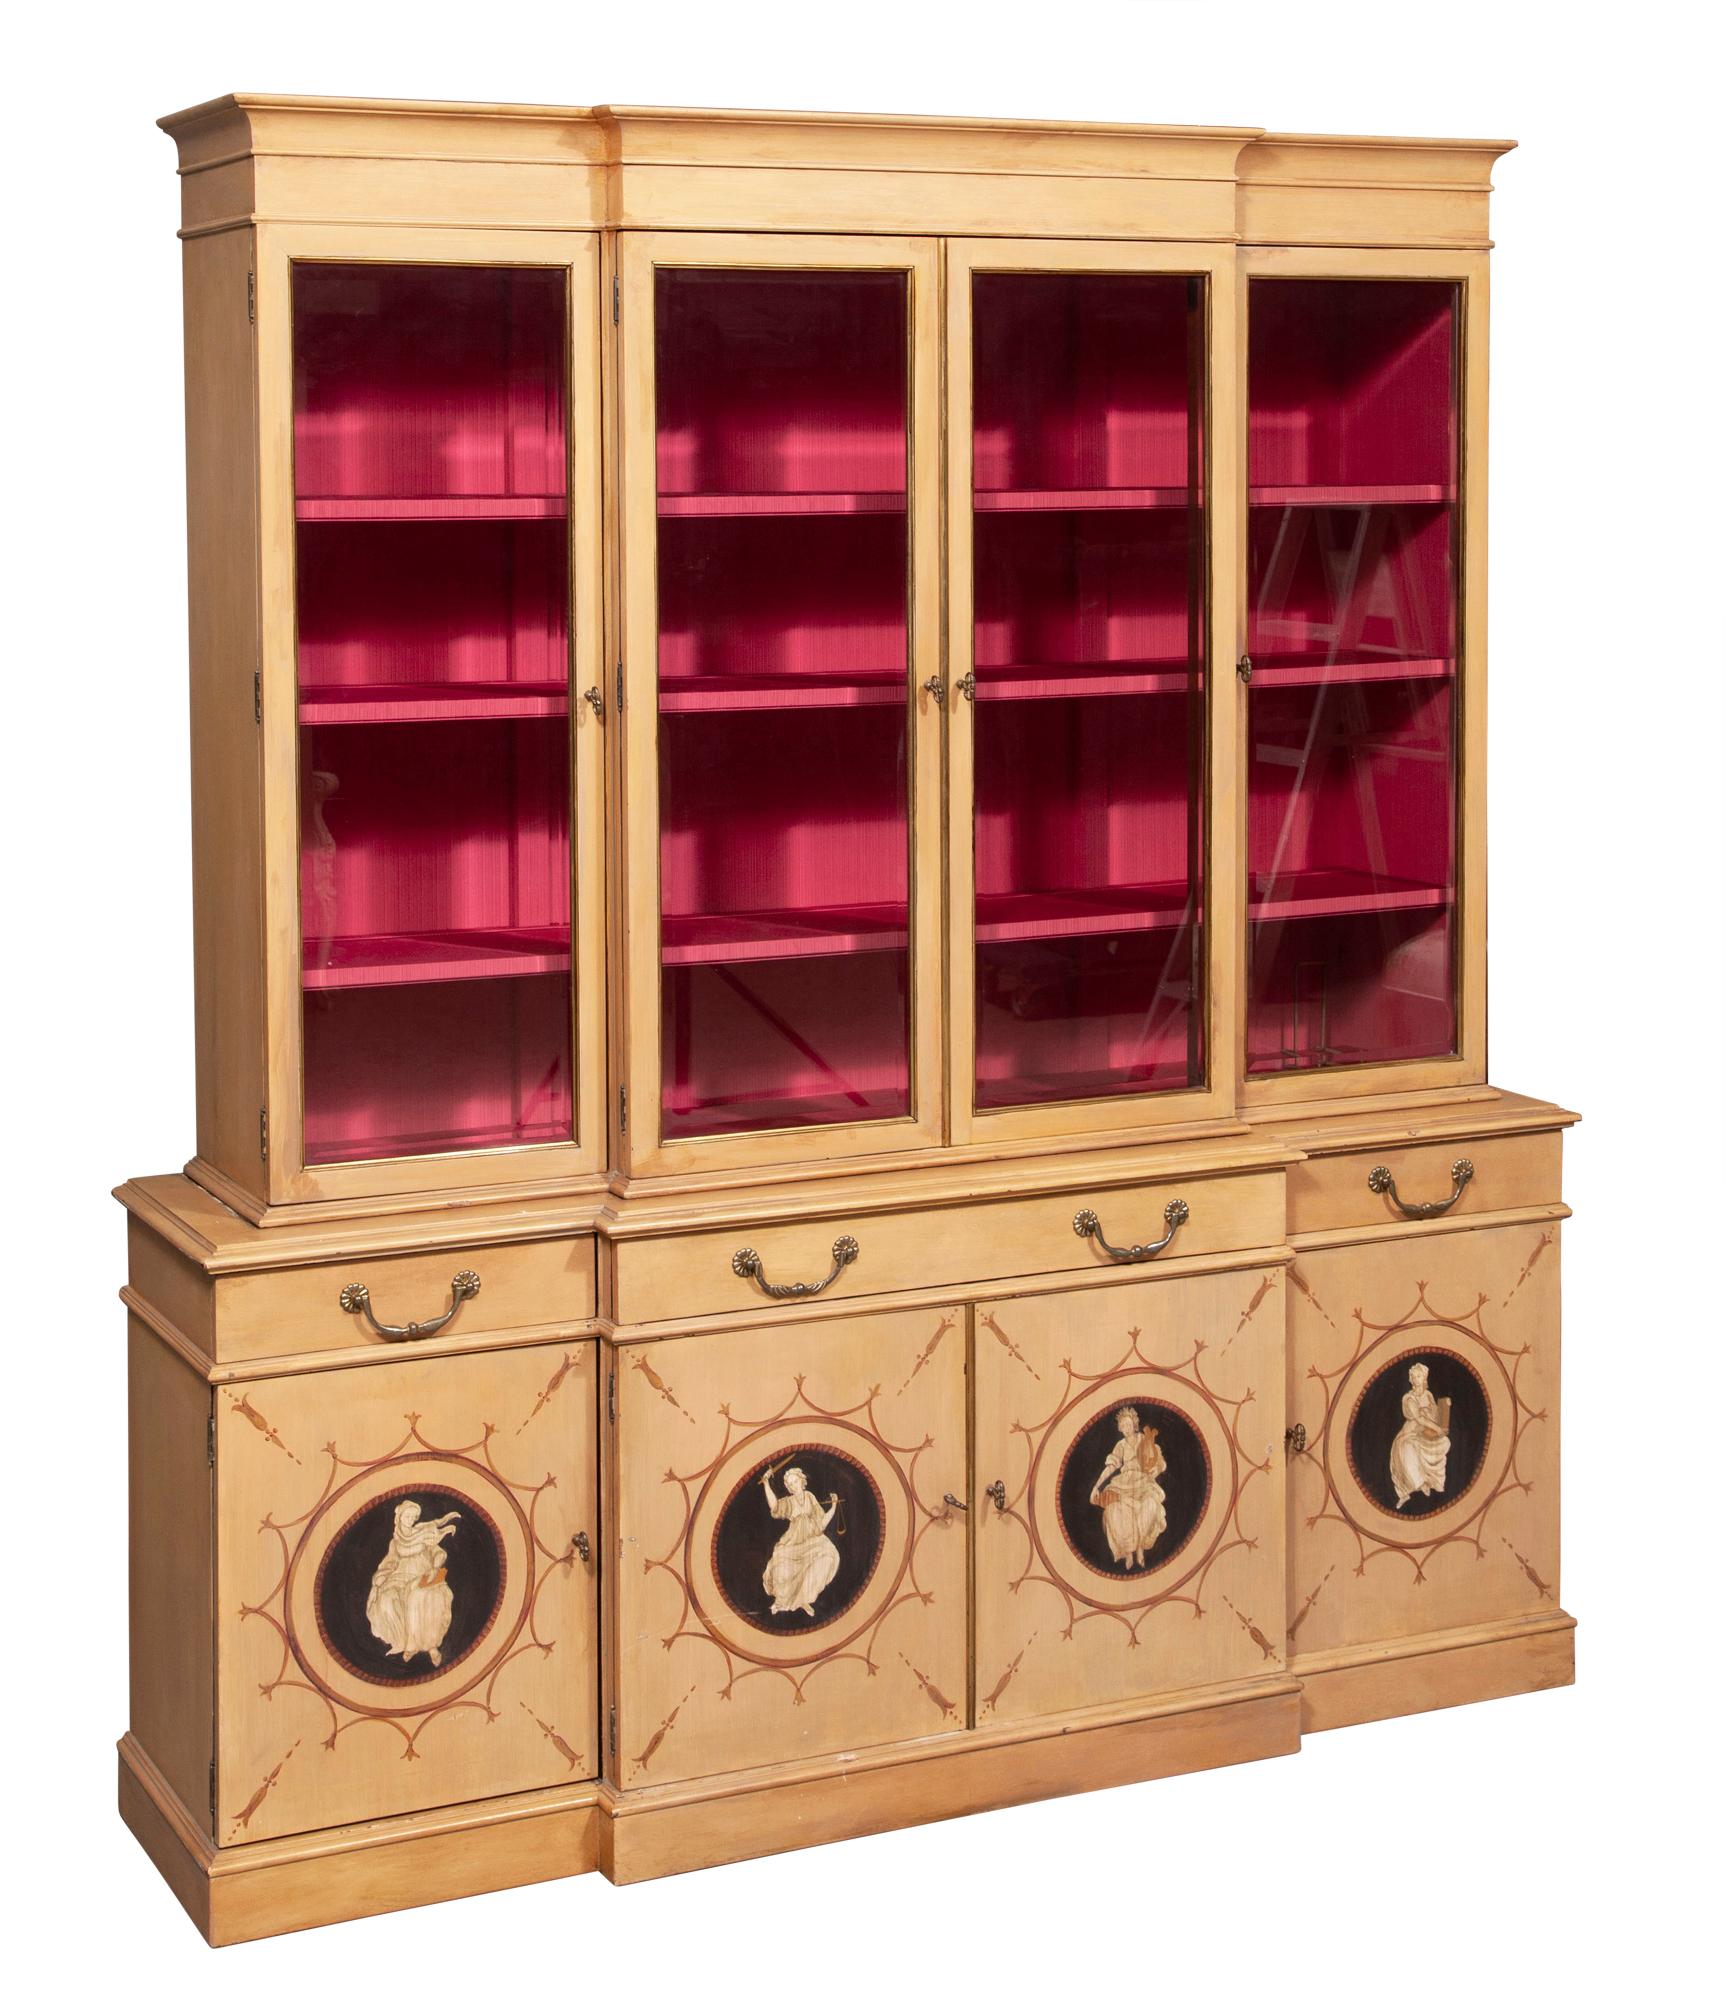 Introducing our exquisite 19th-century Neoclassical Style Hand-Painted & Decorated Front Breakfront/Secretary Bookcase, a stunning blend of artistry and functionality that adds a touch of timeless elegance to your living space.
This two-part